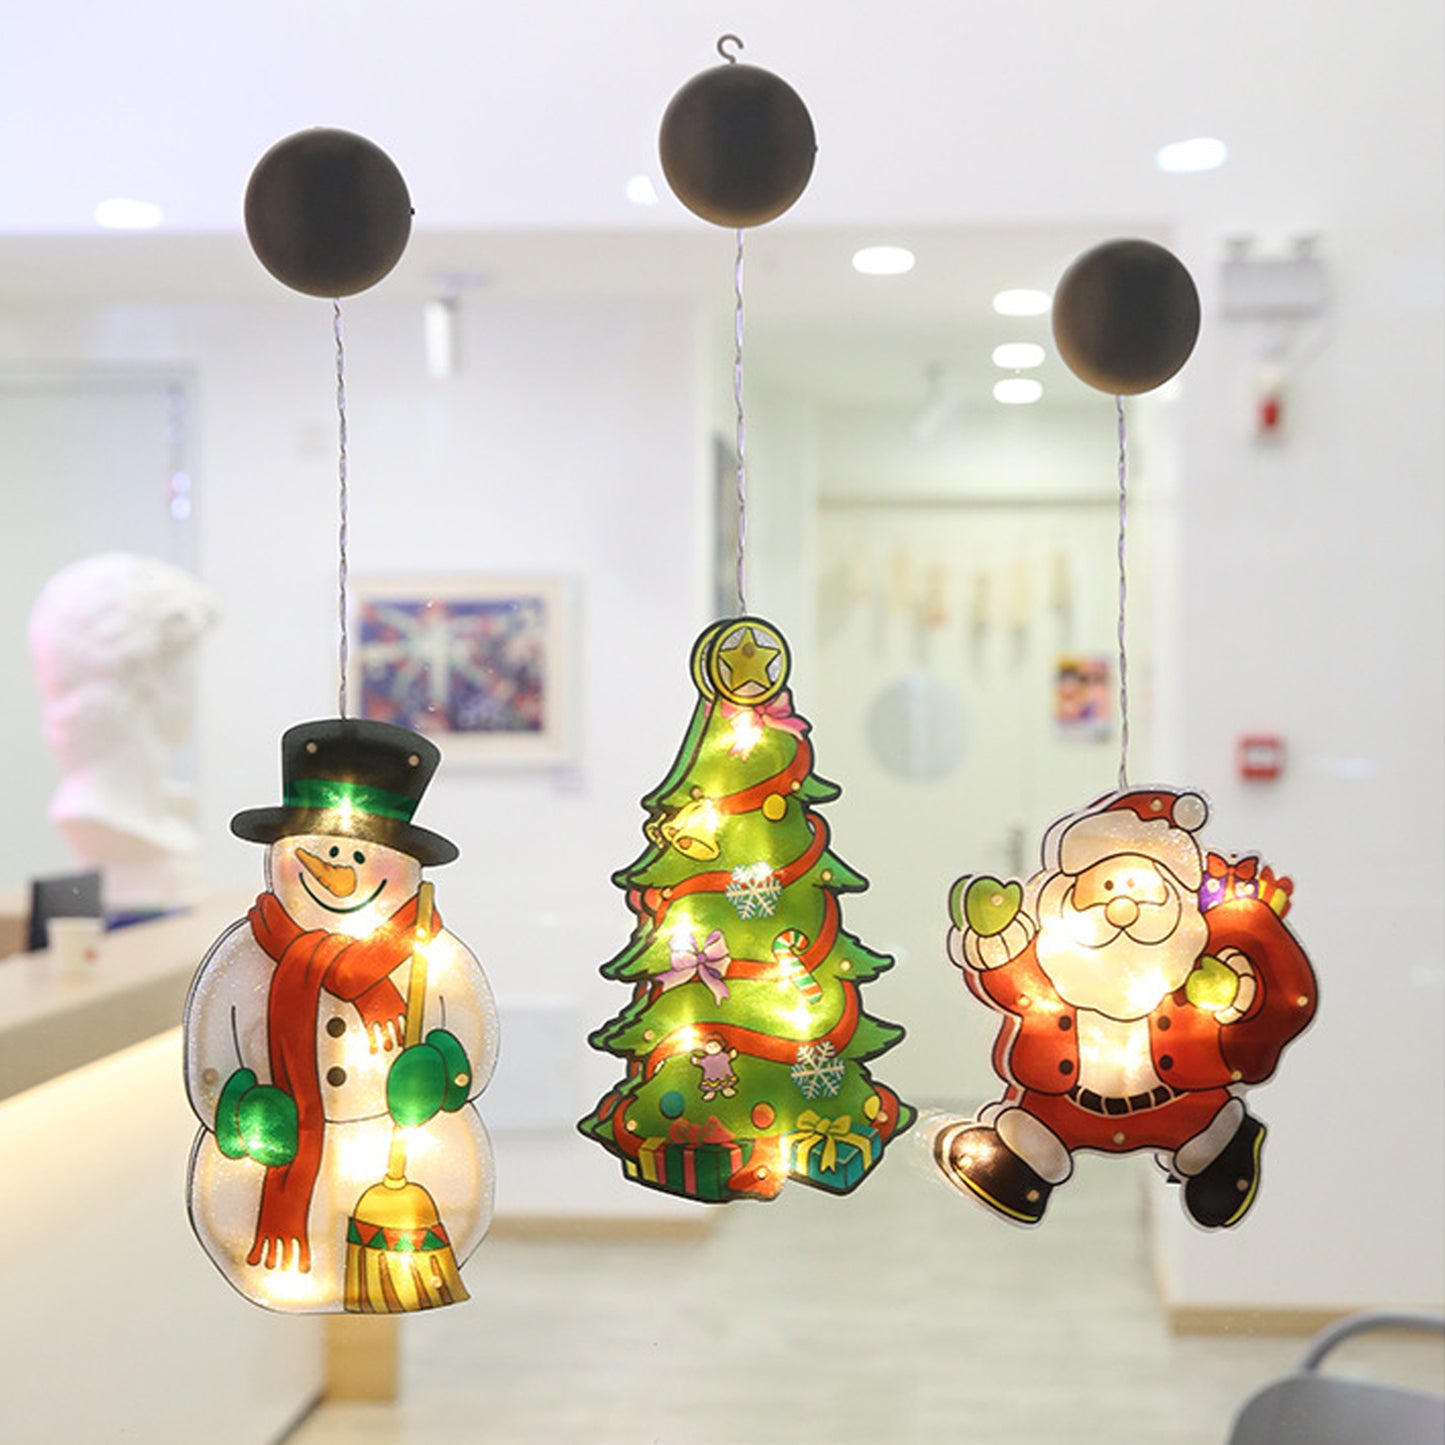 4 pcs Christmas Window Decorations Indoor led Hanging Lights Ornaments Battery Operated for Xmas Store Party Bedroom Scene Layout